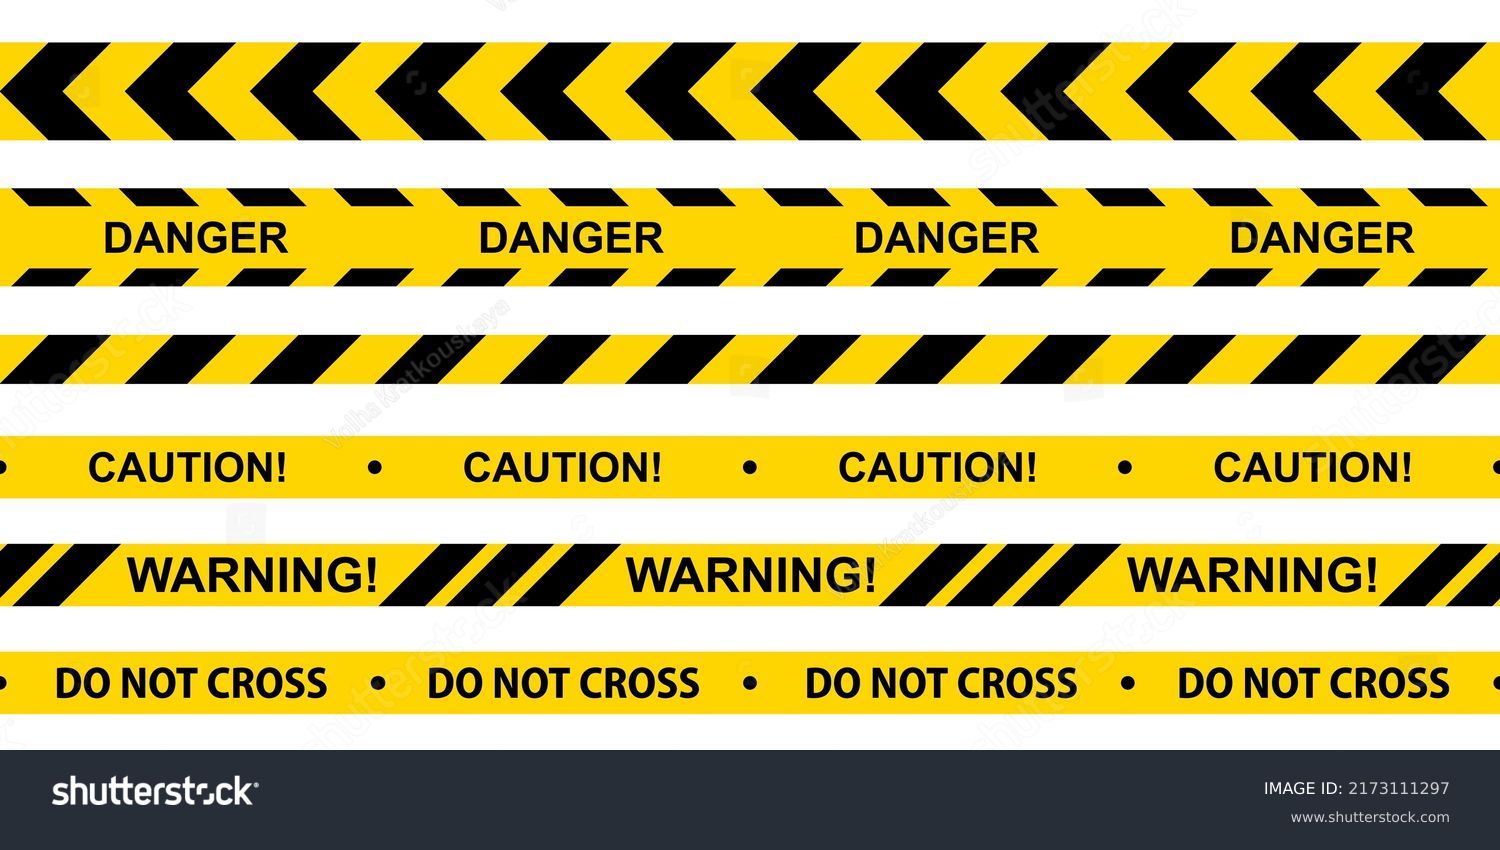 SVG of Caution tape set. Yellow warning danger tapes. Police line and do not cross ribbons. Abstract warning lines for police, accident, under construction. Horizontal seamless borders. Vector illustration svg